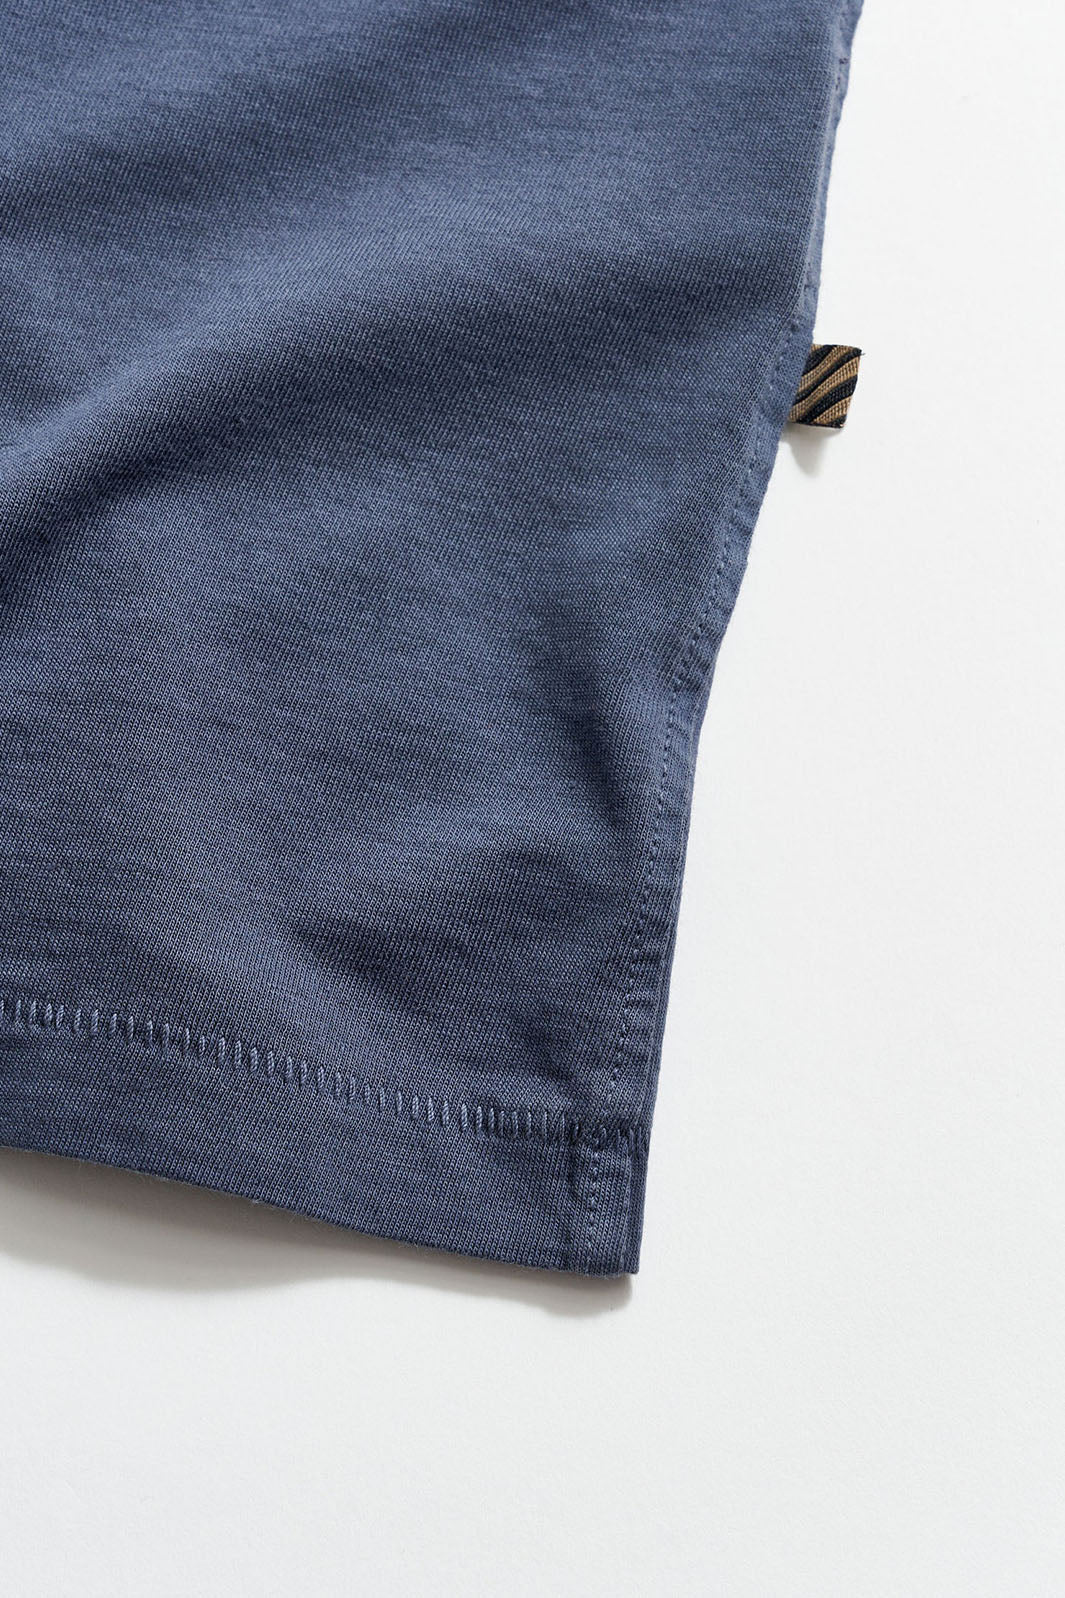 Washed T-Shirt - Navy